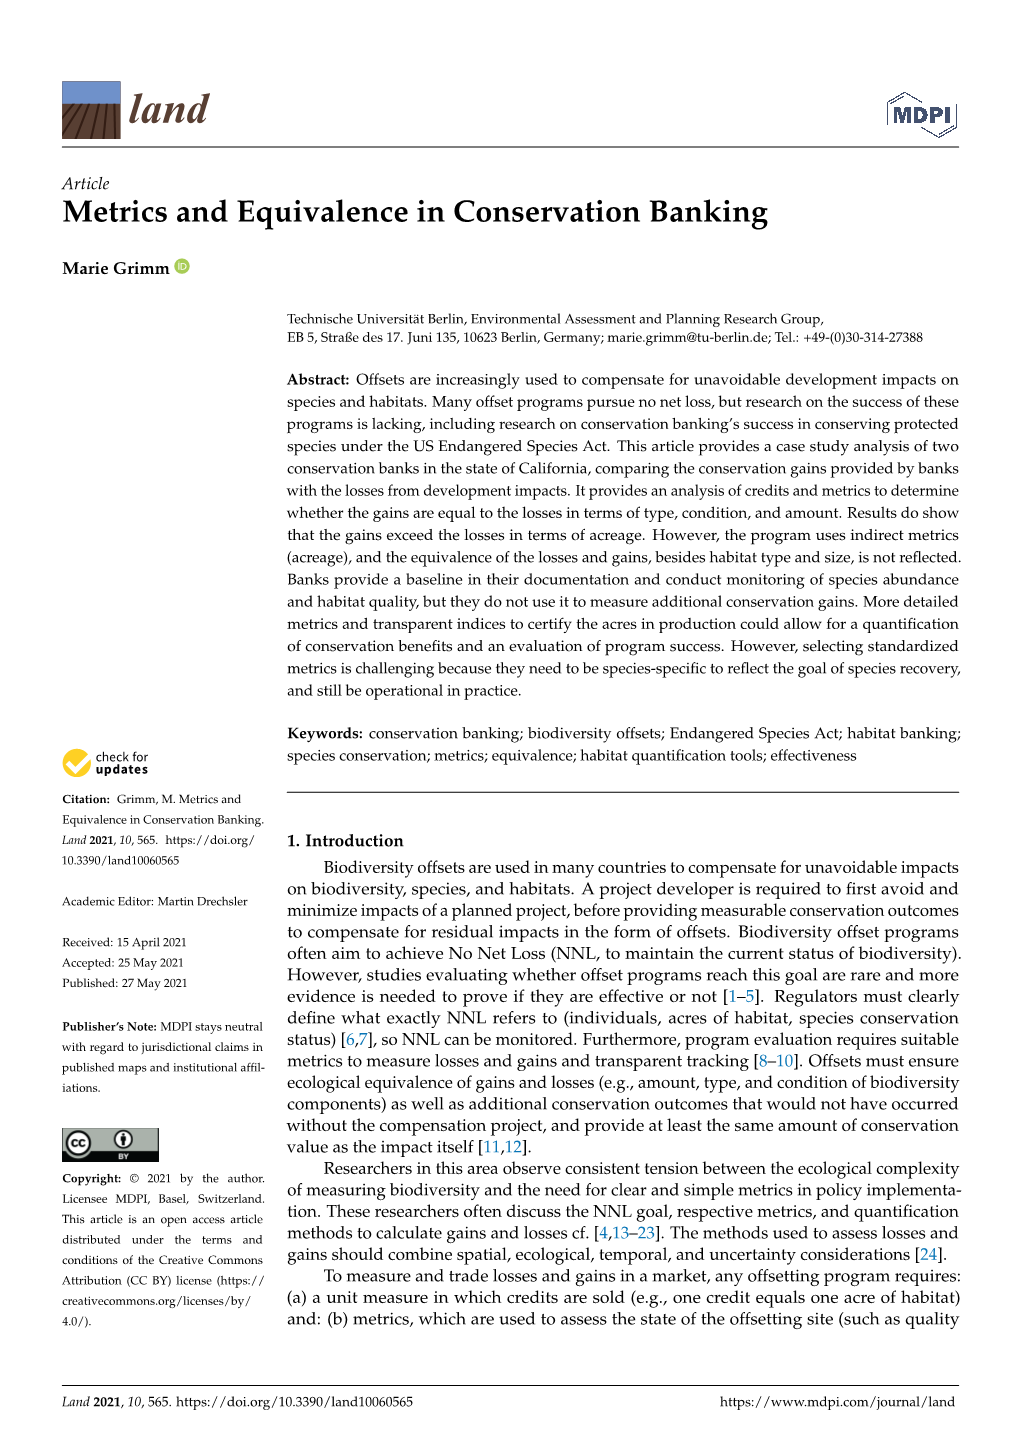 Metrics and Equivalence in Conservation Banking